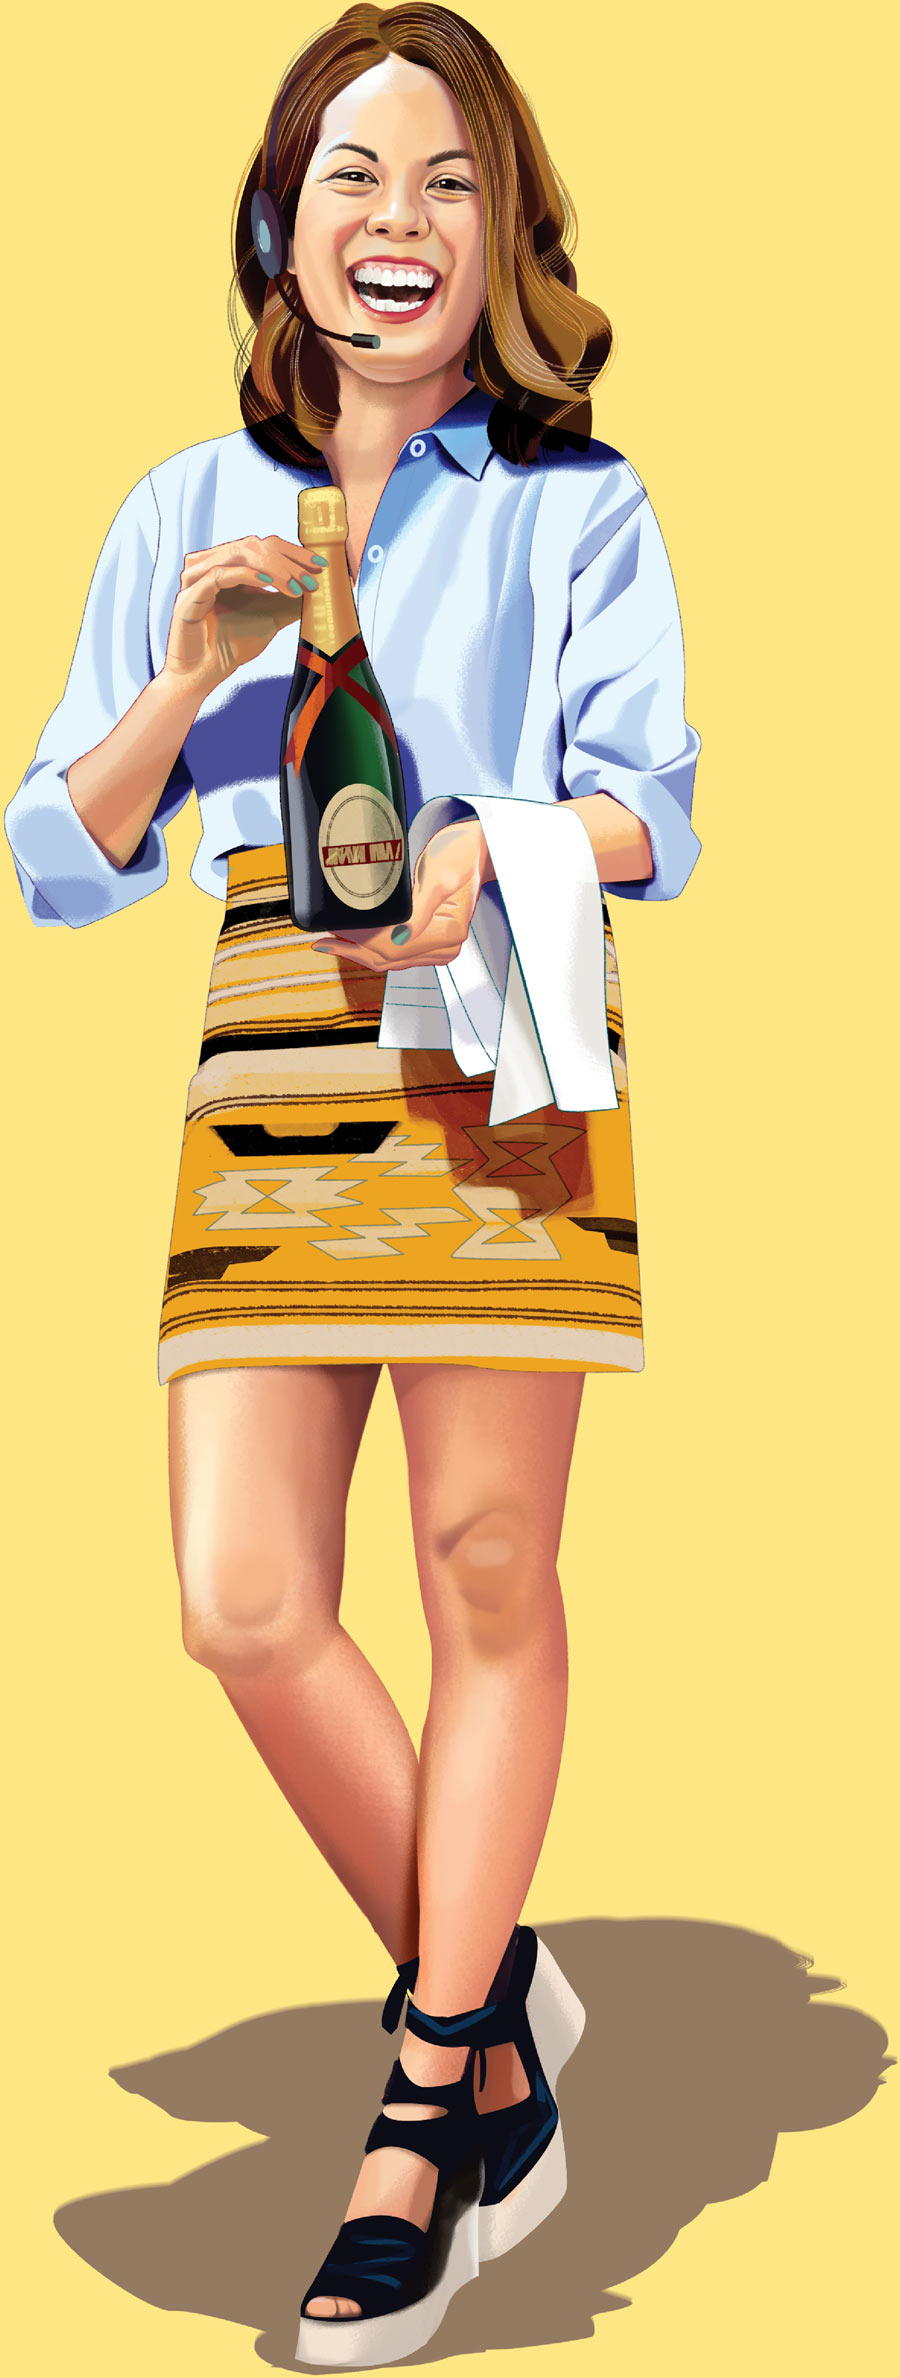 digital illustration of Abby Borden wearing a headset and holding a bottle of champagne